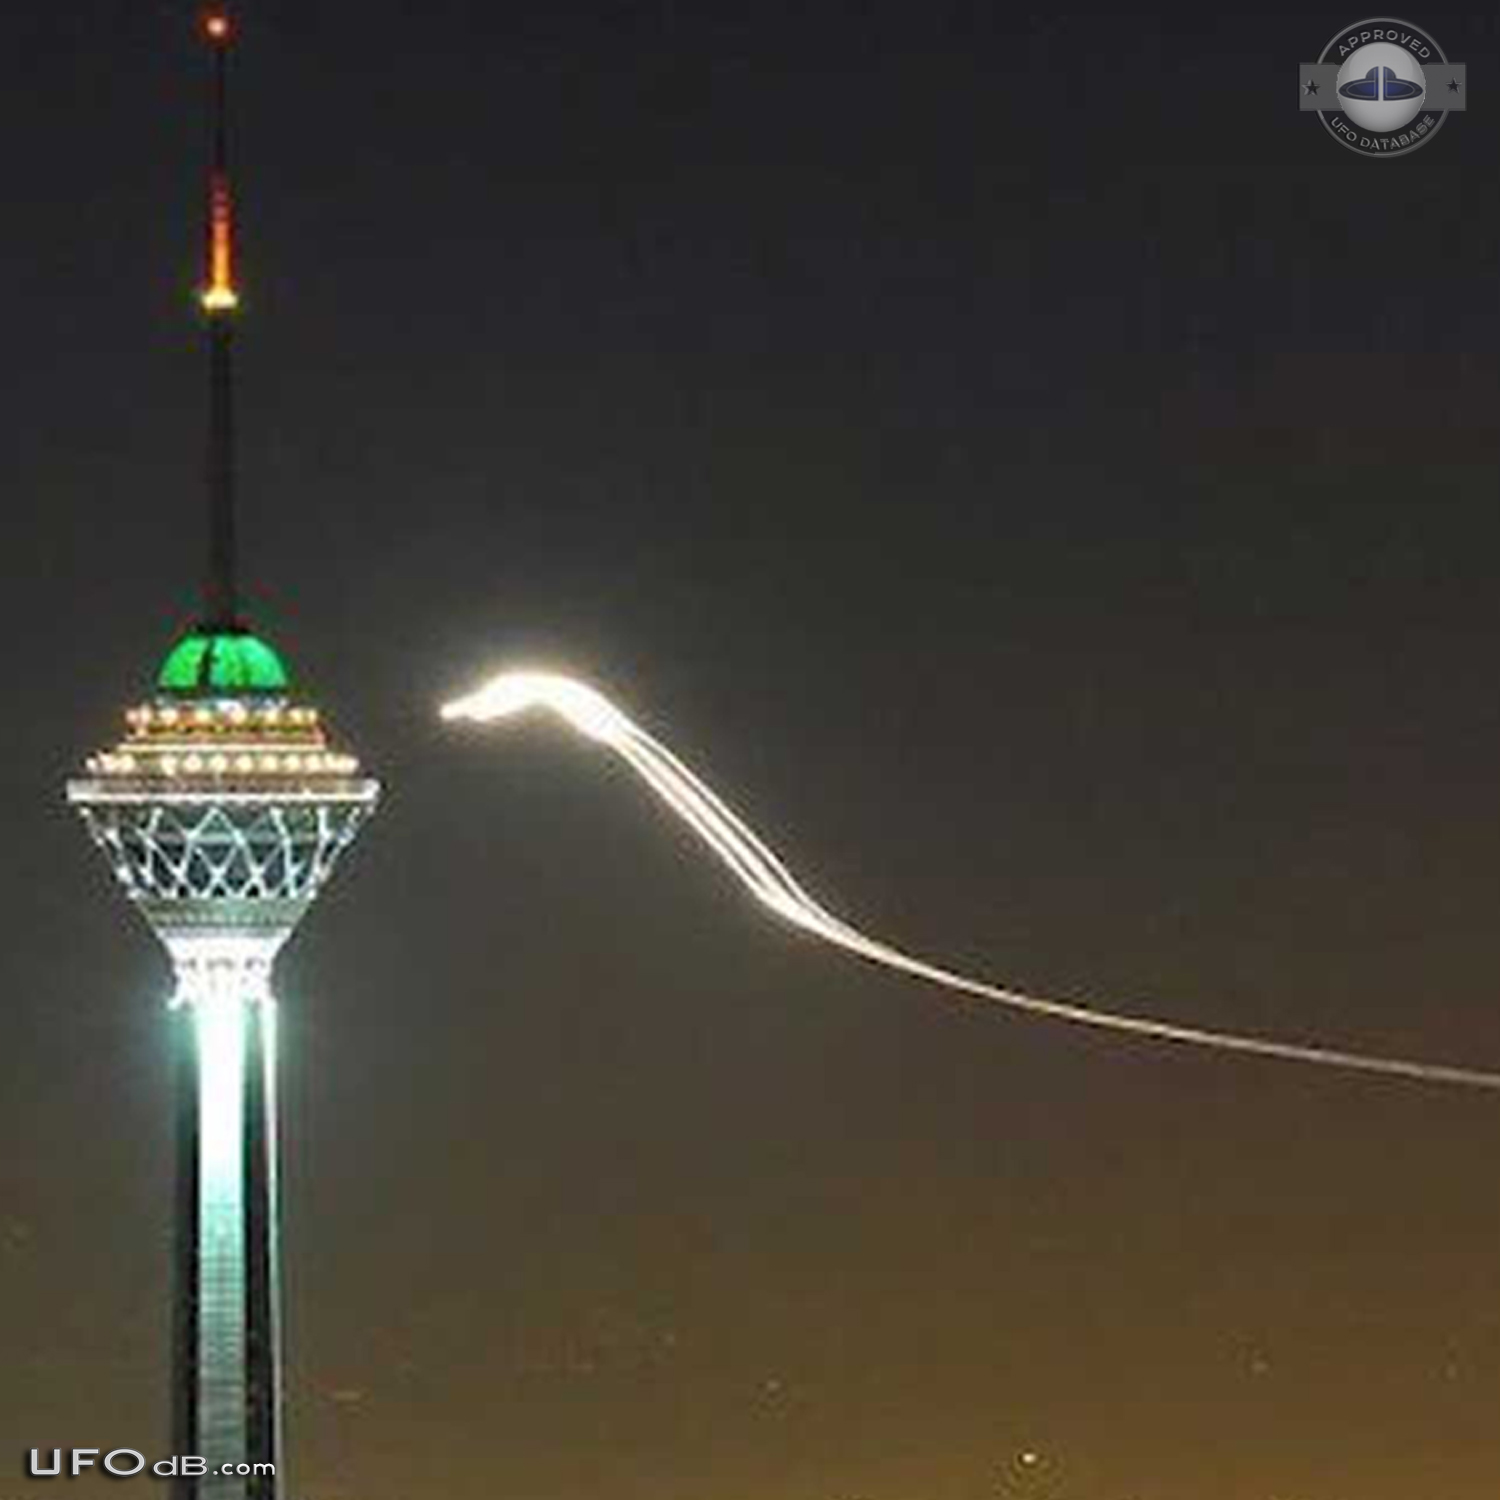 Glowing UFO with long trail near Milad Tower, Tehran, Iran 2012 UFO Picture #437-4